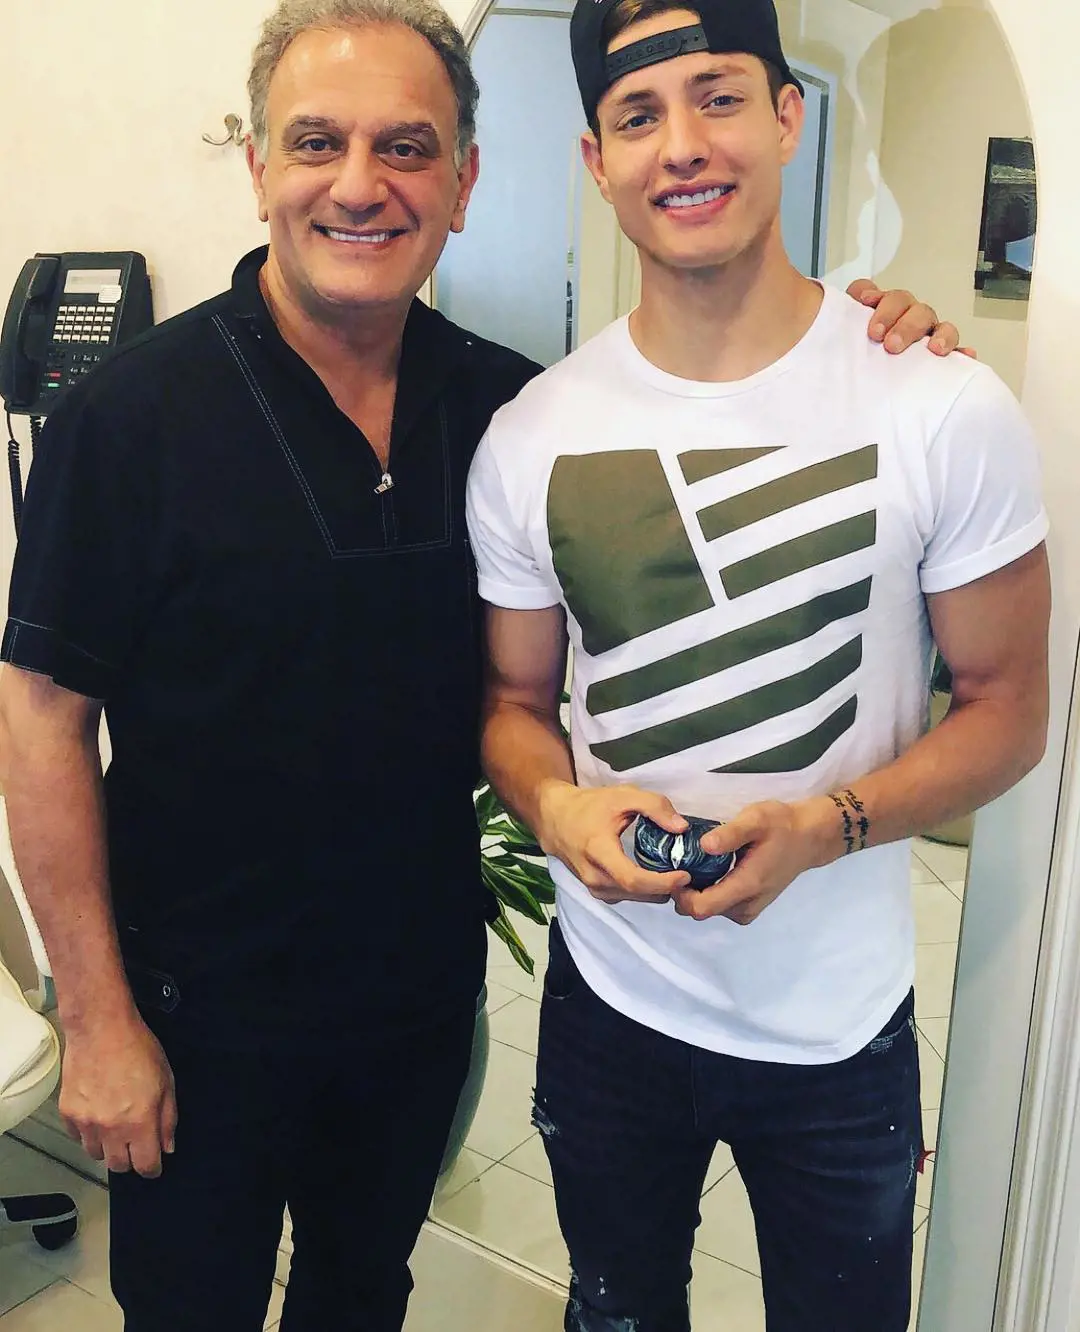 Matt shared a picture with Dr. Kourosh after he successfully transformed his teeth on June, 2018